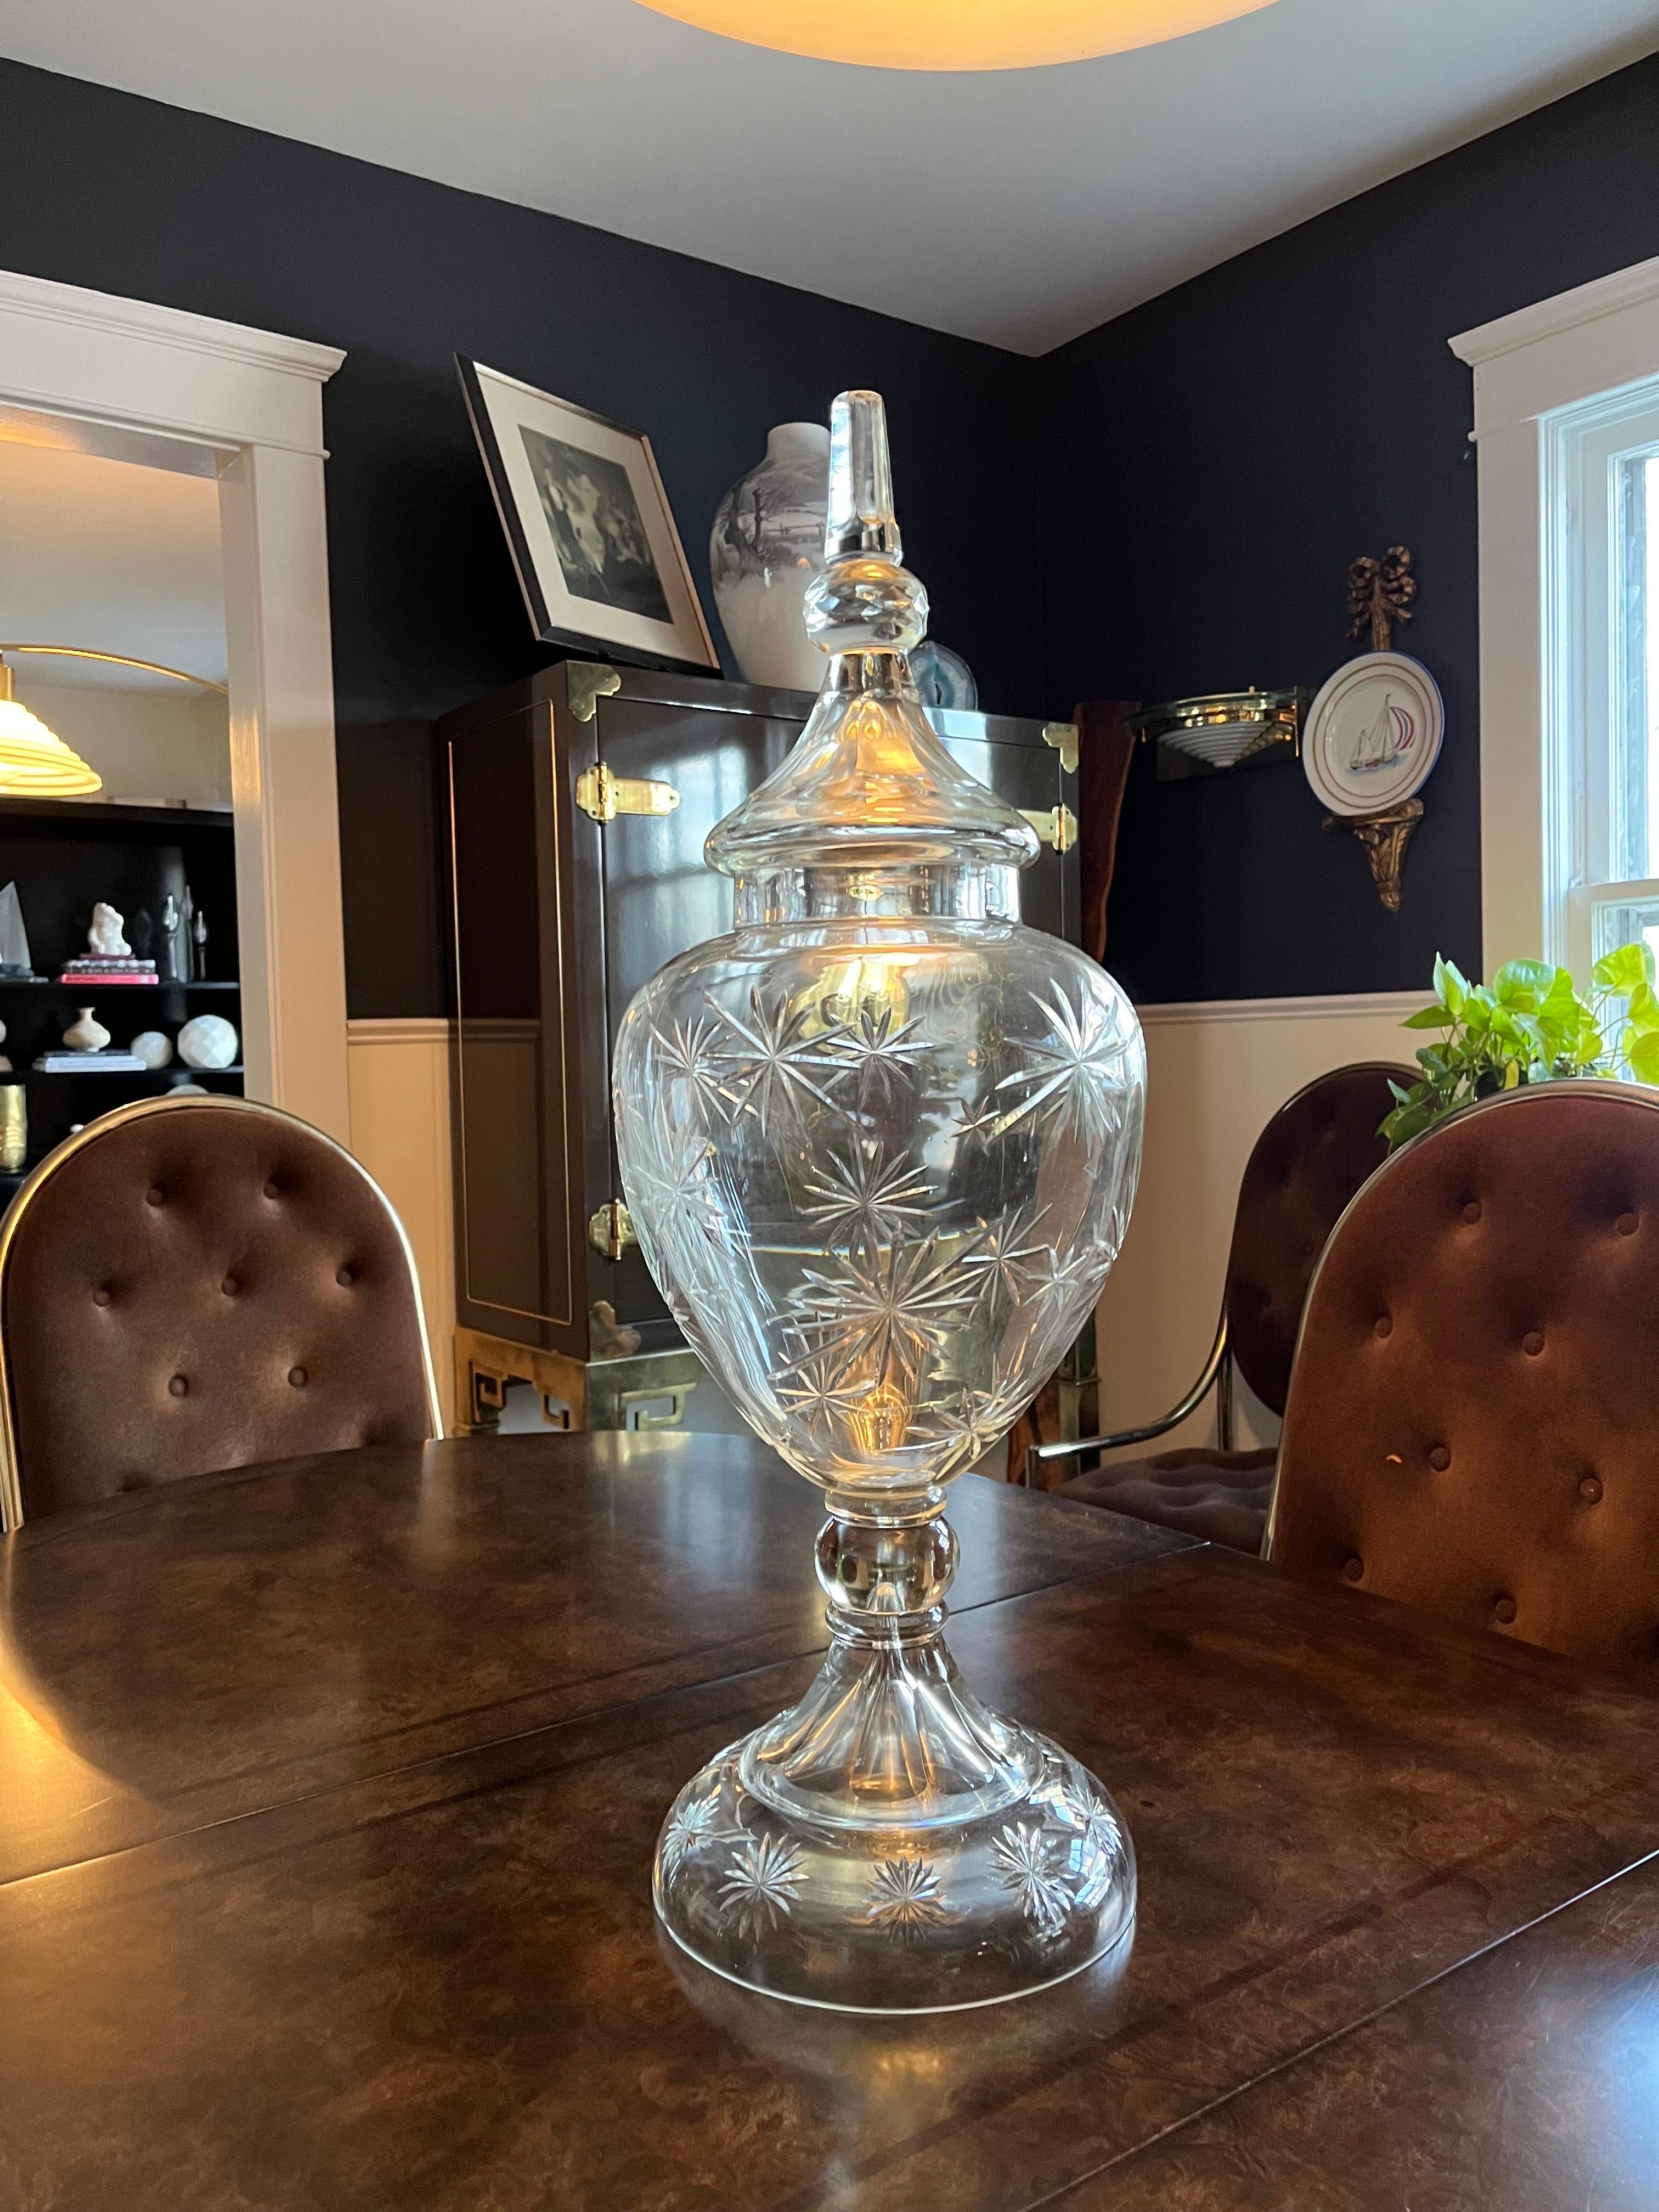 Beautiful cut glass or crystal lidded urn. Deep faceted starburst design. Very large and heavy. Thick glass with great visual. Many starbursts throughout the piece. 
Curbside delivery to NYC/Philly $400